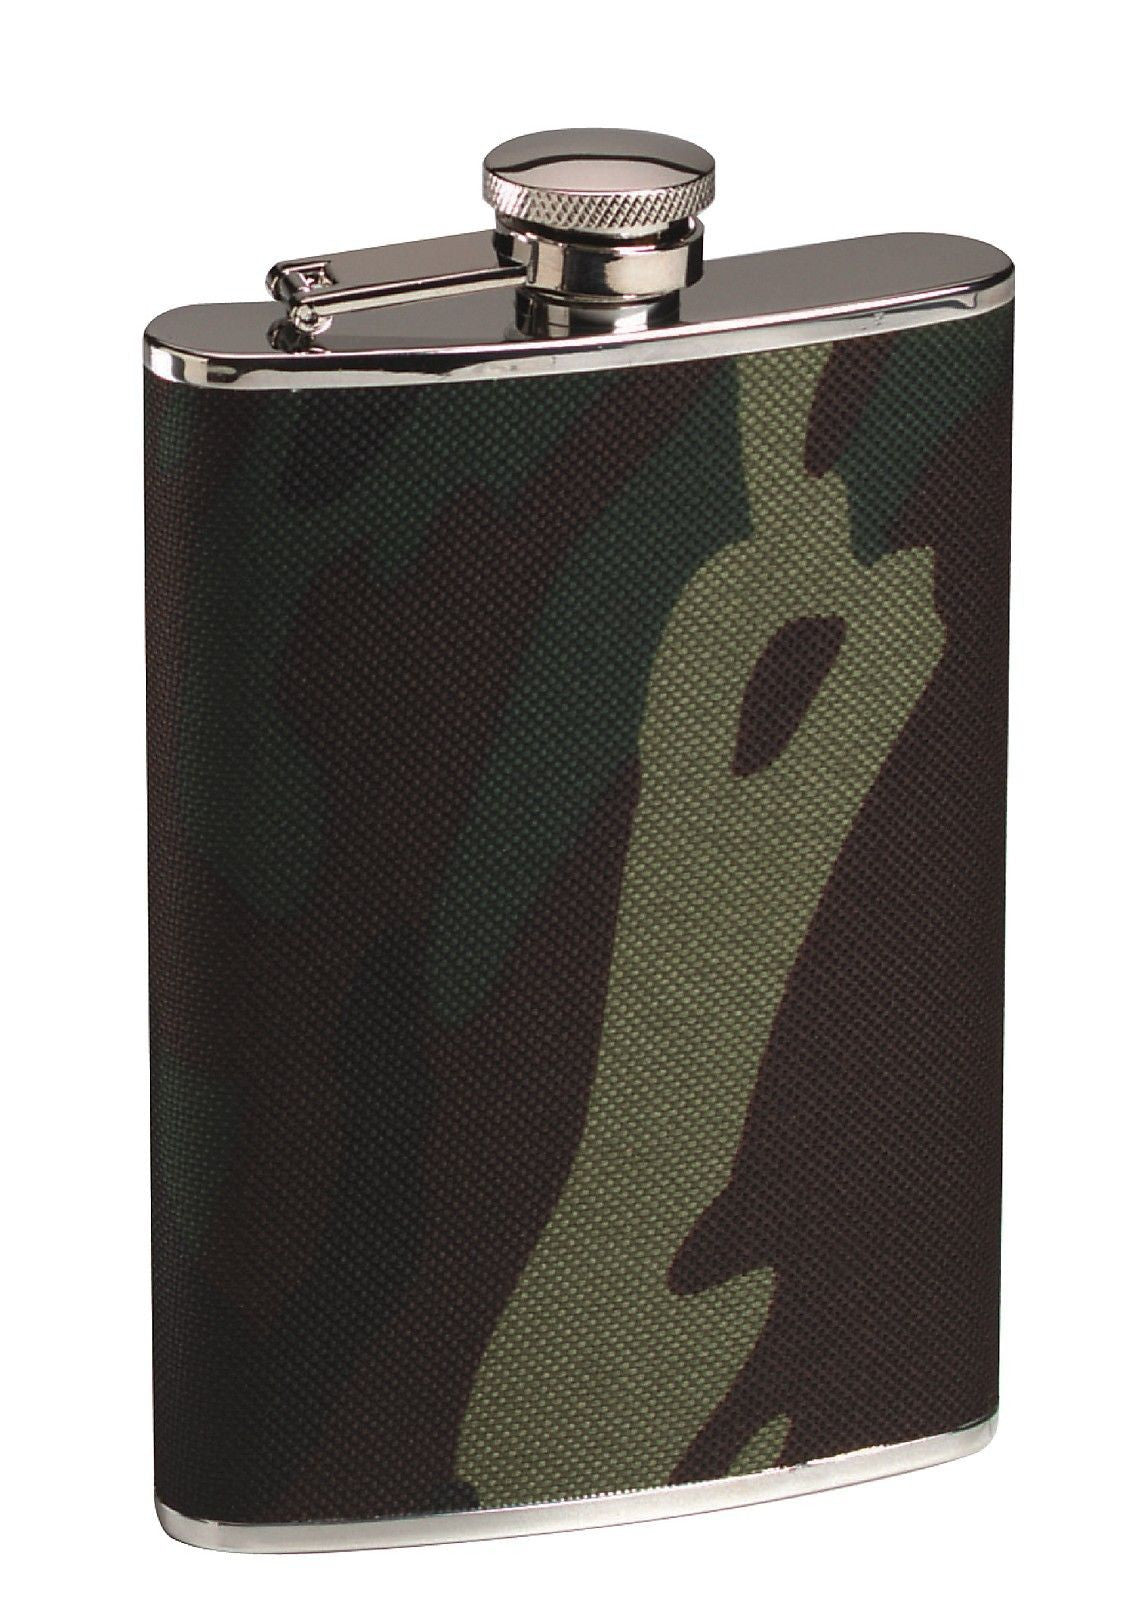 Stainless Steel Woodland Camo Flask - 8oz Nylon Camo Cover Camoulflage Flask